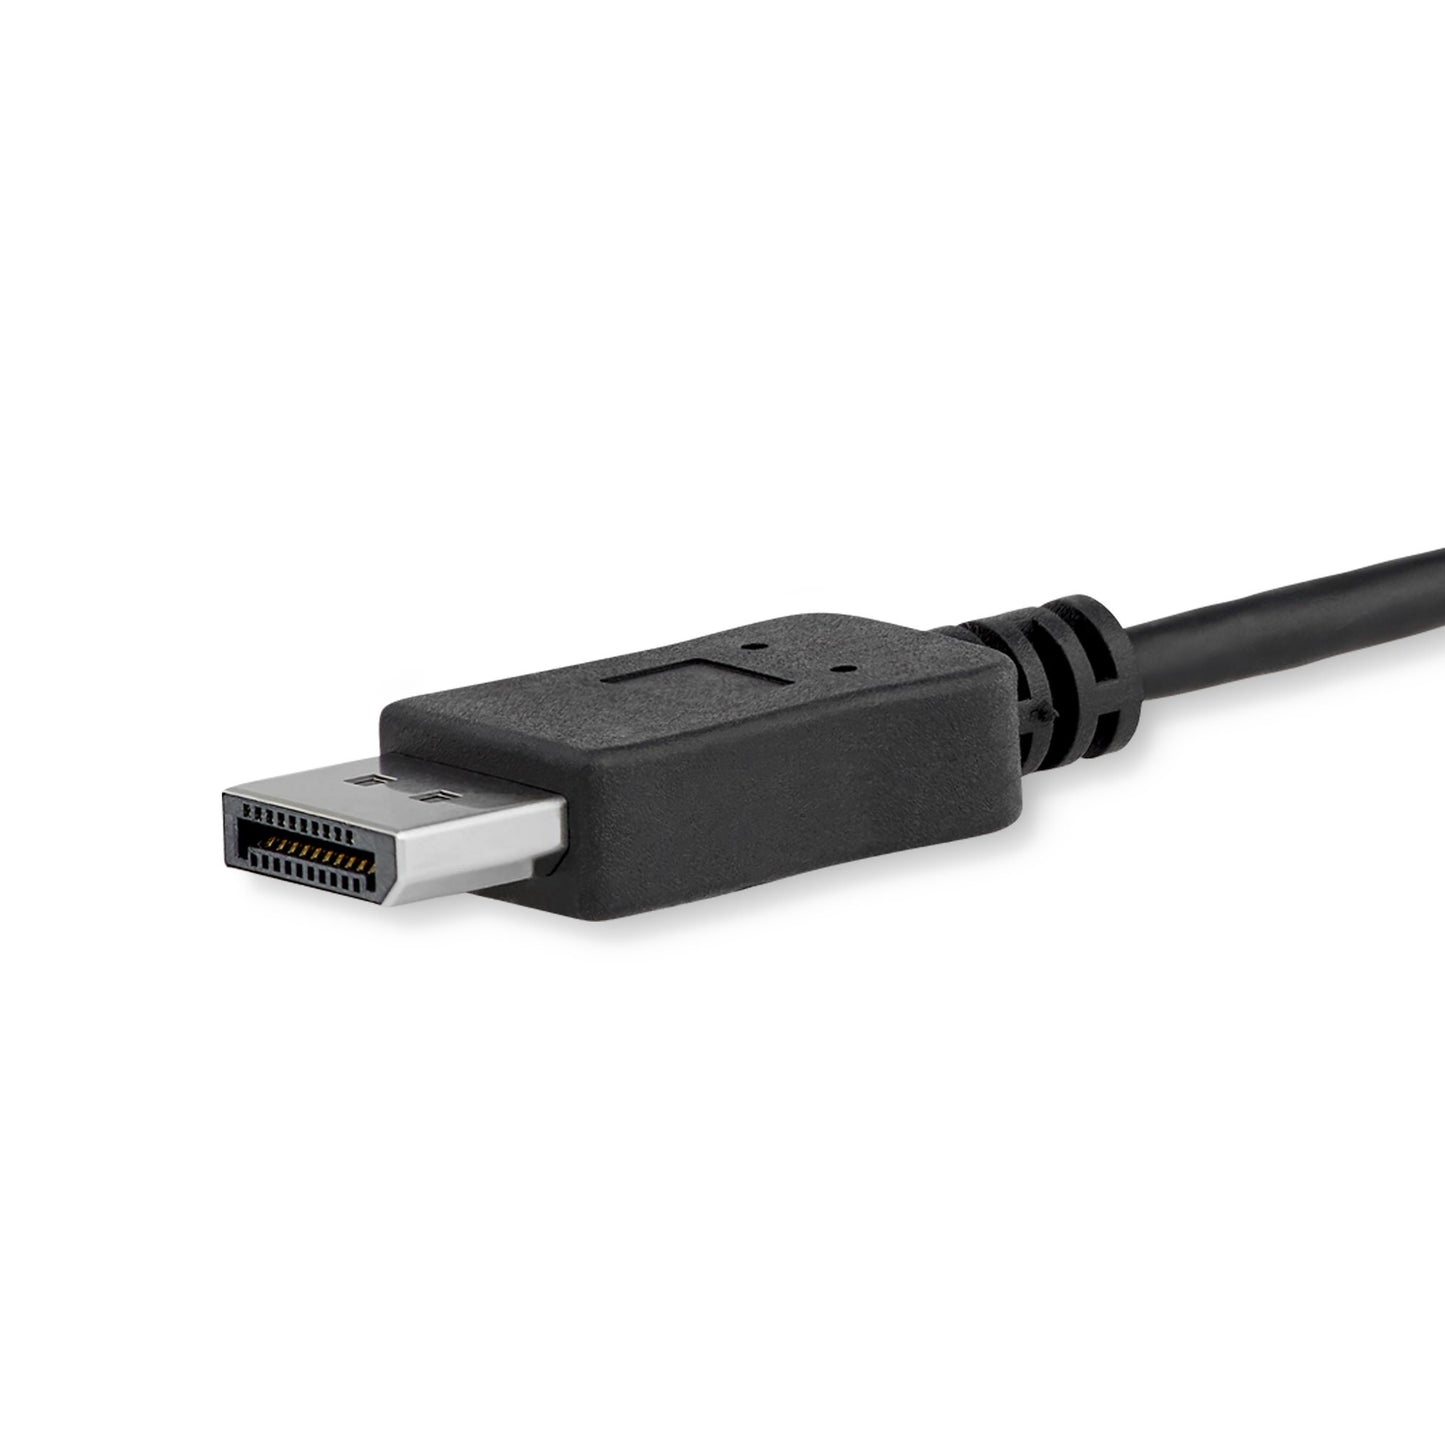 StarTech.com 3ft/1m USB C to DisplayPort 1.2 Cable 4K 60Hz - USB-C to DisplayPort Adapter Cable - HBR2 - USB Type-C DP Alt Mode to DP Monitor Video Cable - Works w/ Thunderbolt 3 - Black-1